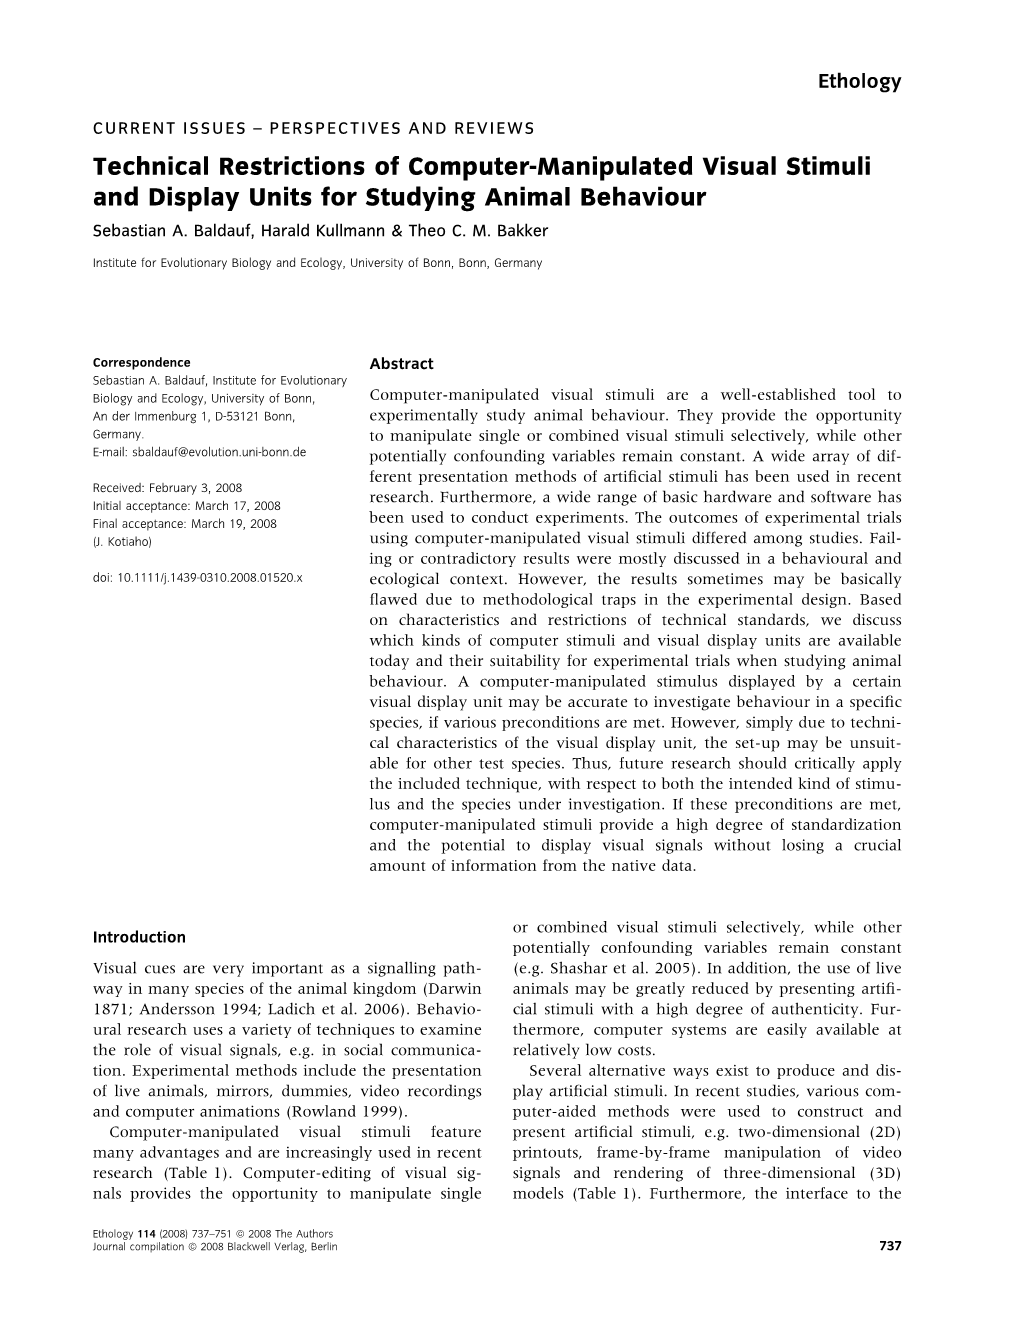 Technical Restrictions of Computer-Manipulated Visual Stimuli and Display Units for Studying Animal Behaviour Sebastian A